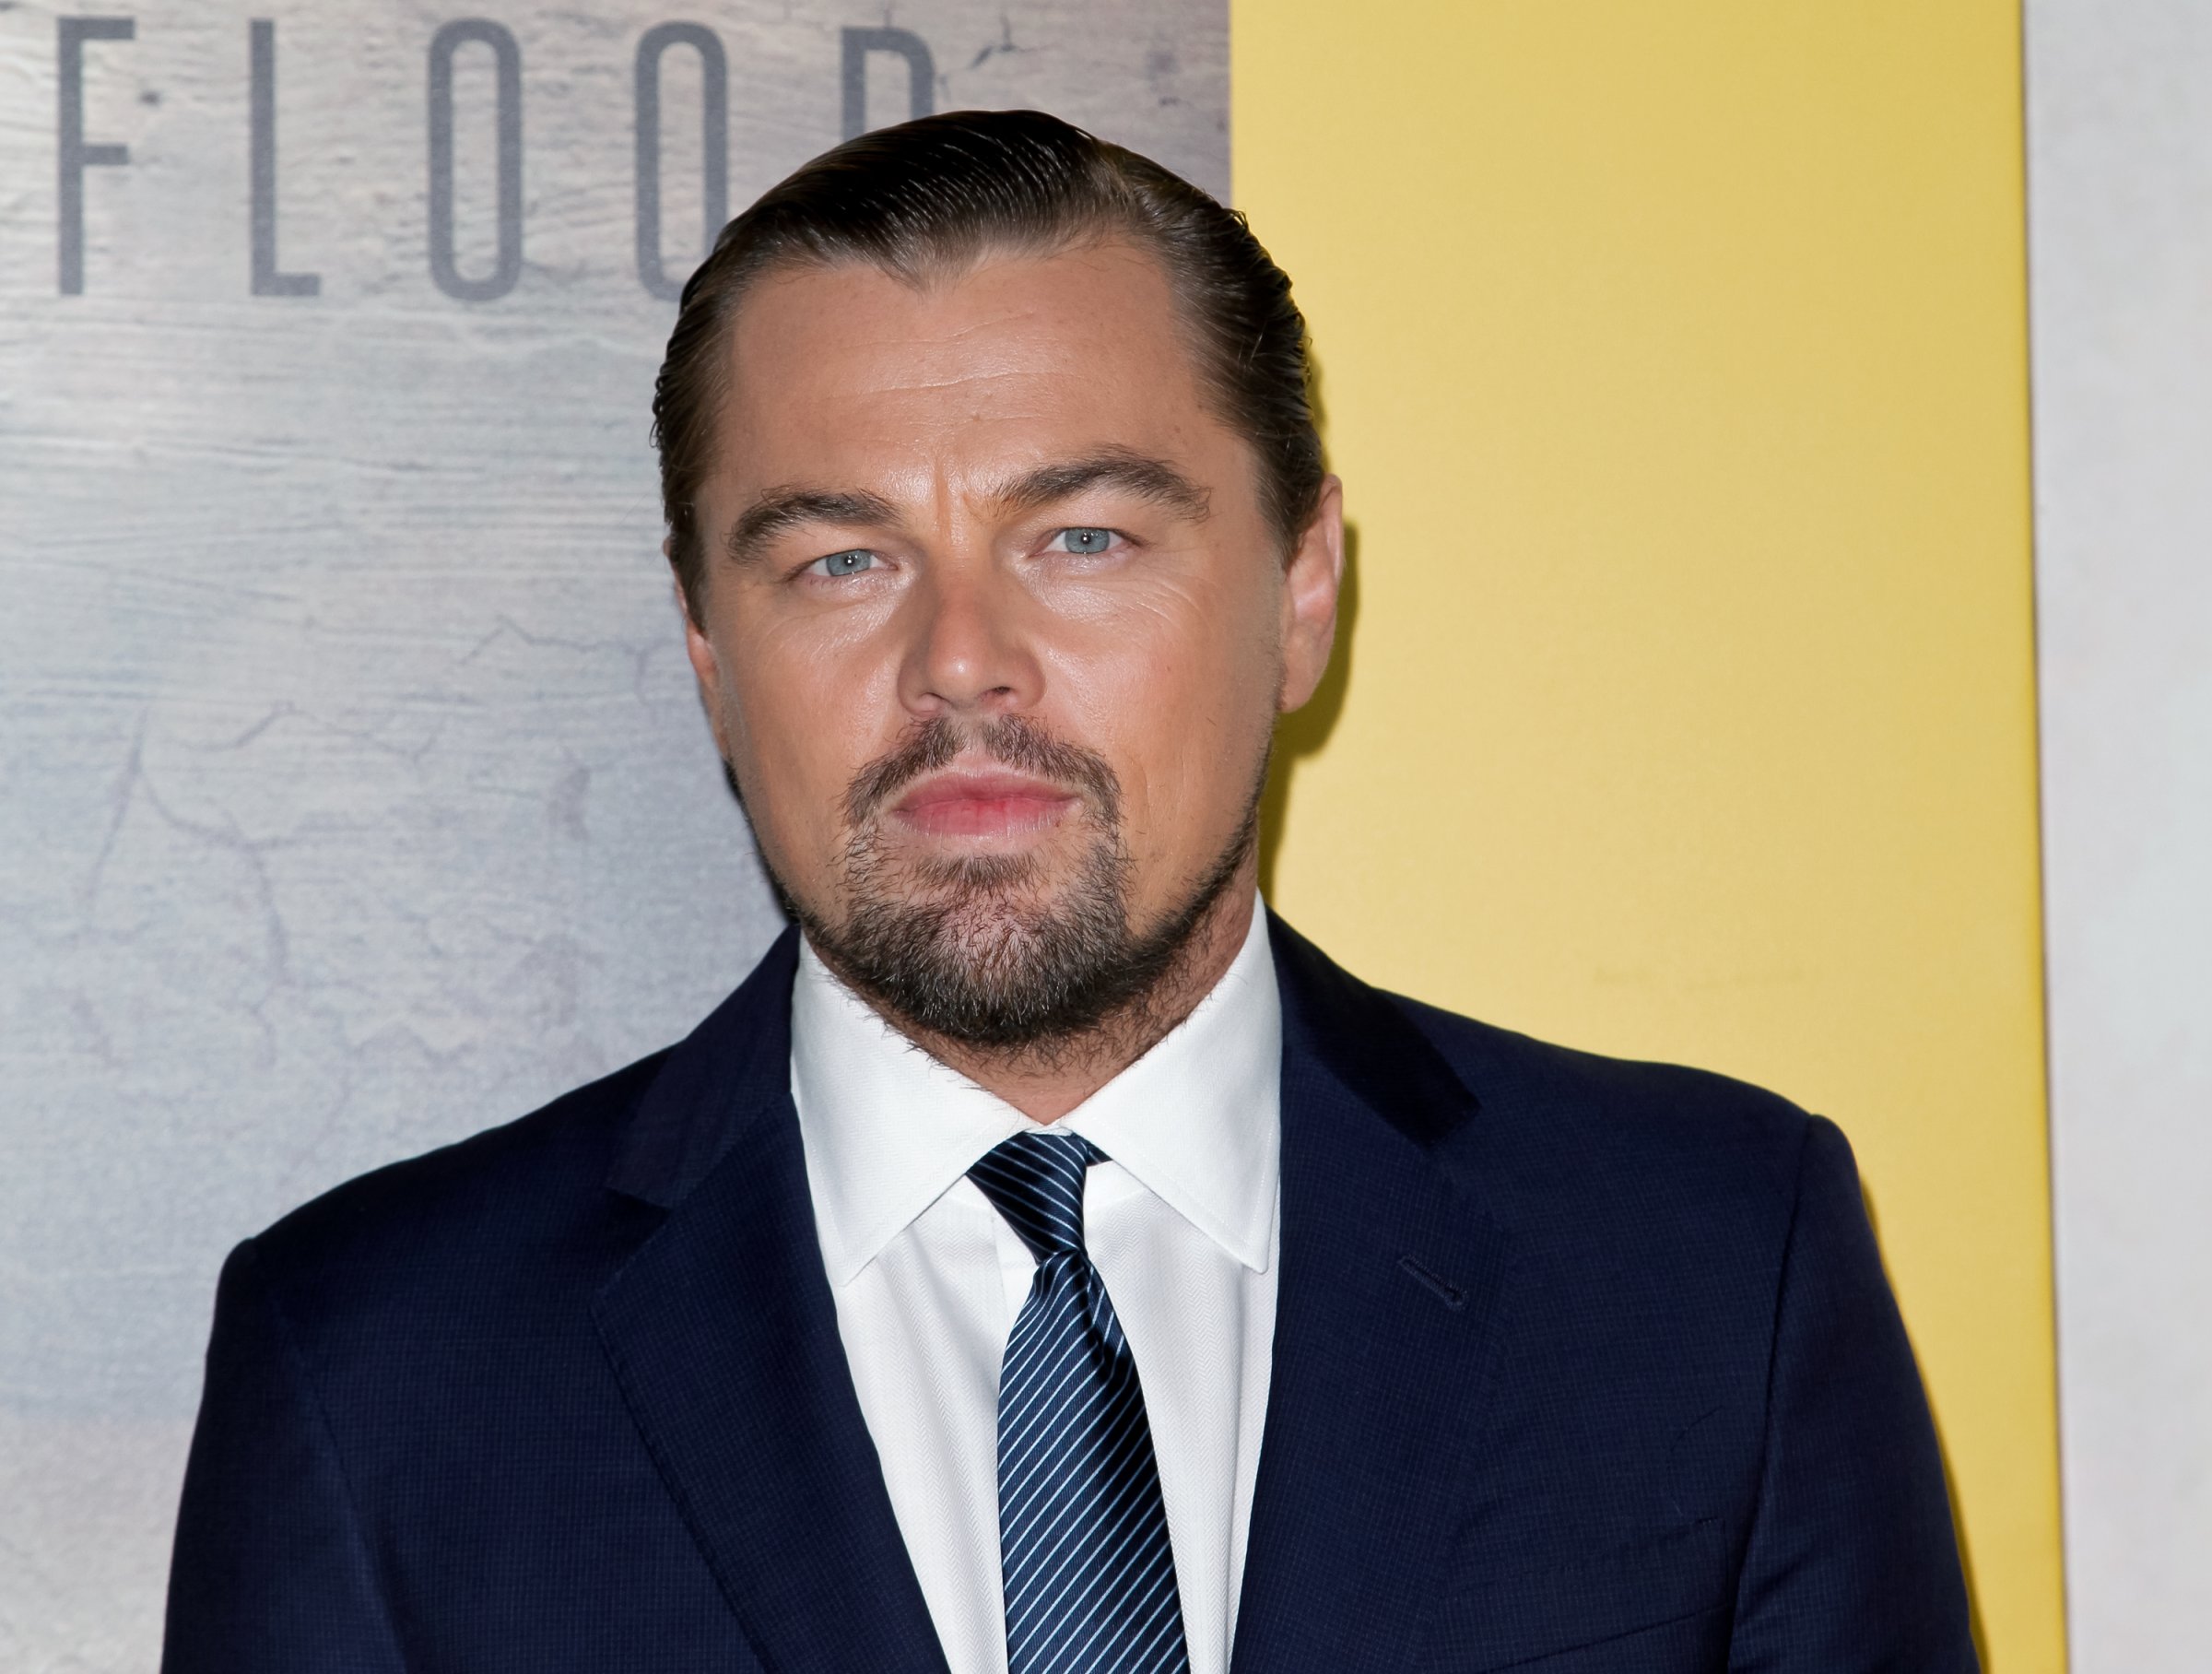 Leonardo DiCaprio attends the Screening of National Geographic Channel's 'Before The Flood' on October 24, 2016 in Los Angeles, California.